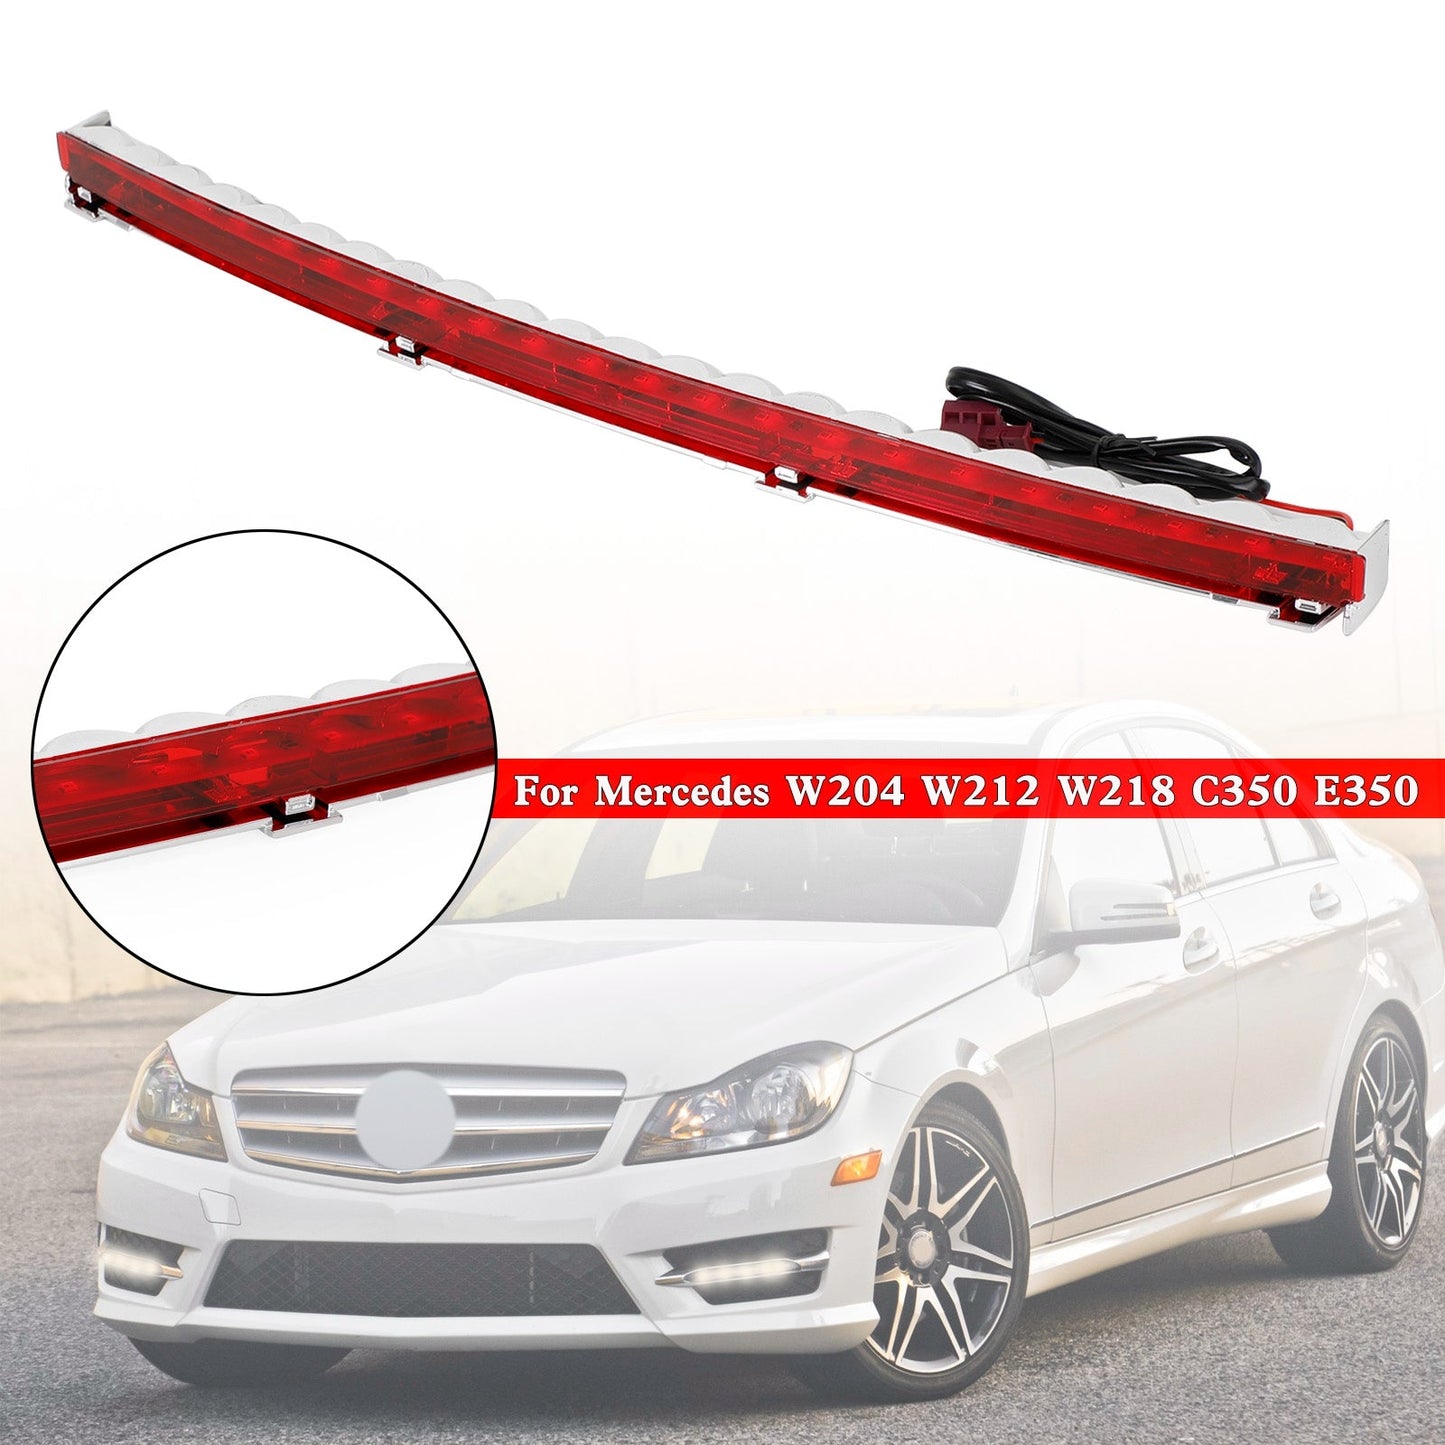 Red Third Stop Brake Light 2048200056 For Mercedes W204 W212 W218 C350 E350